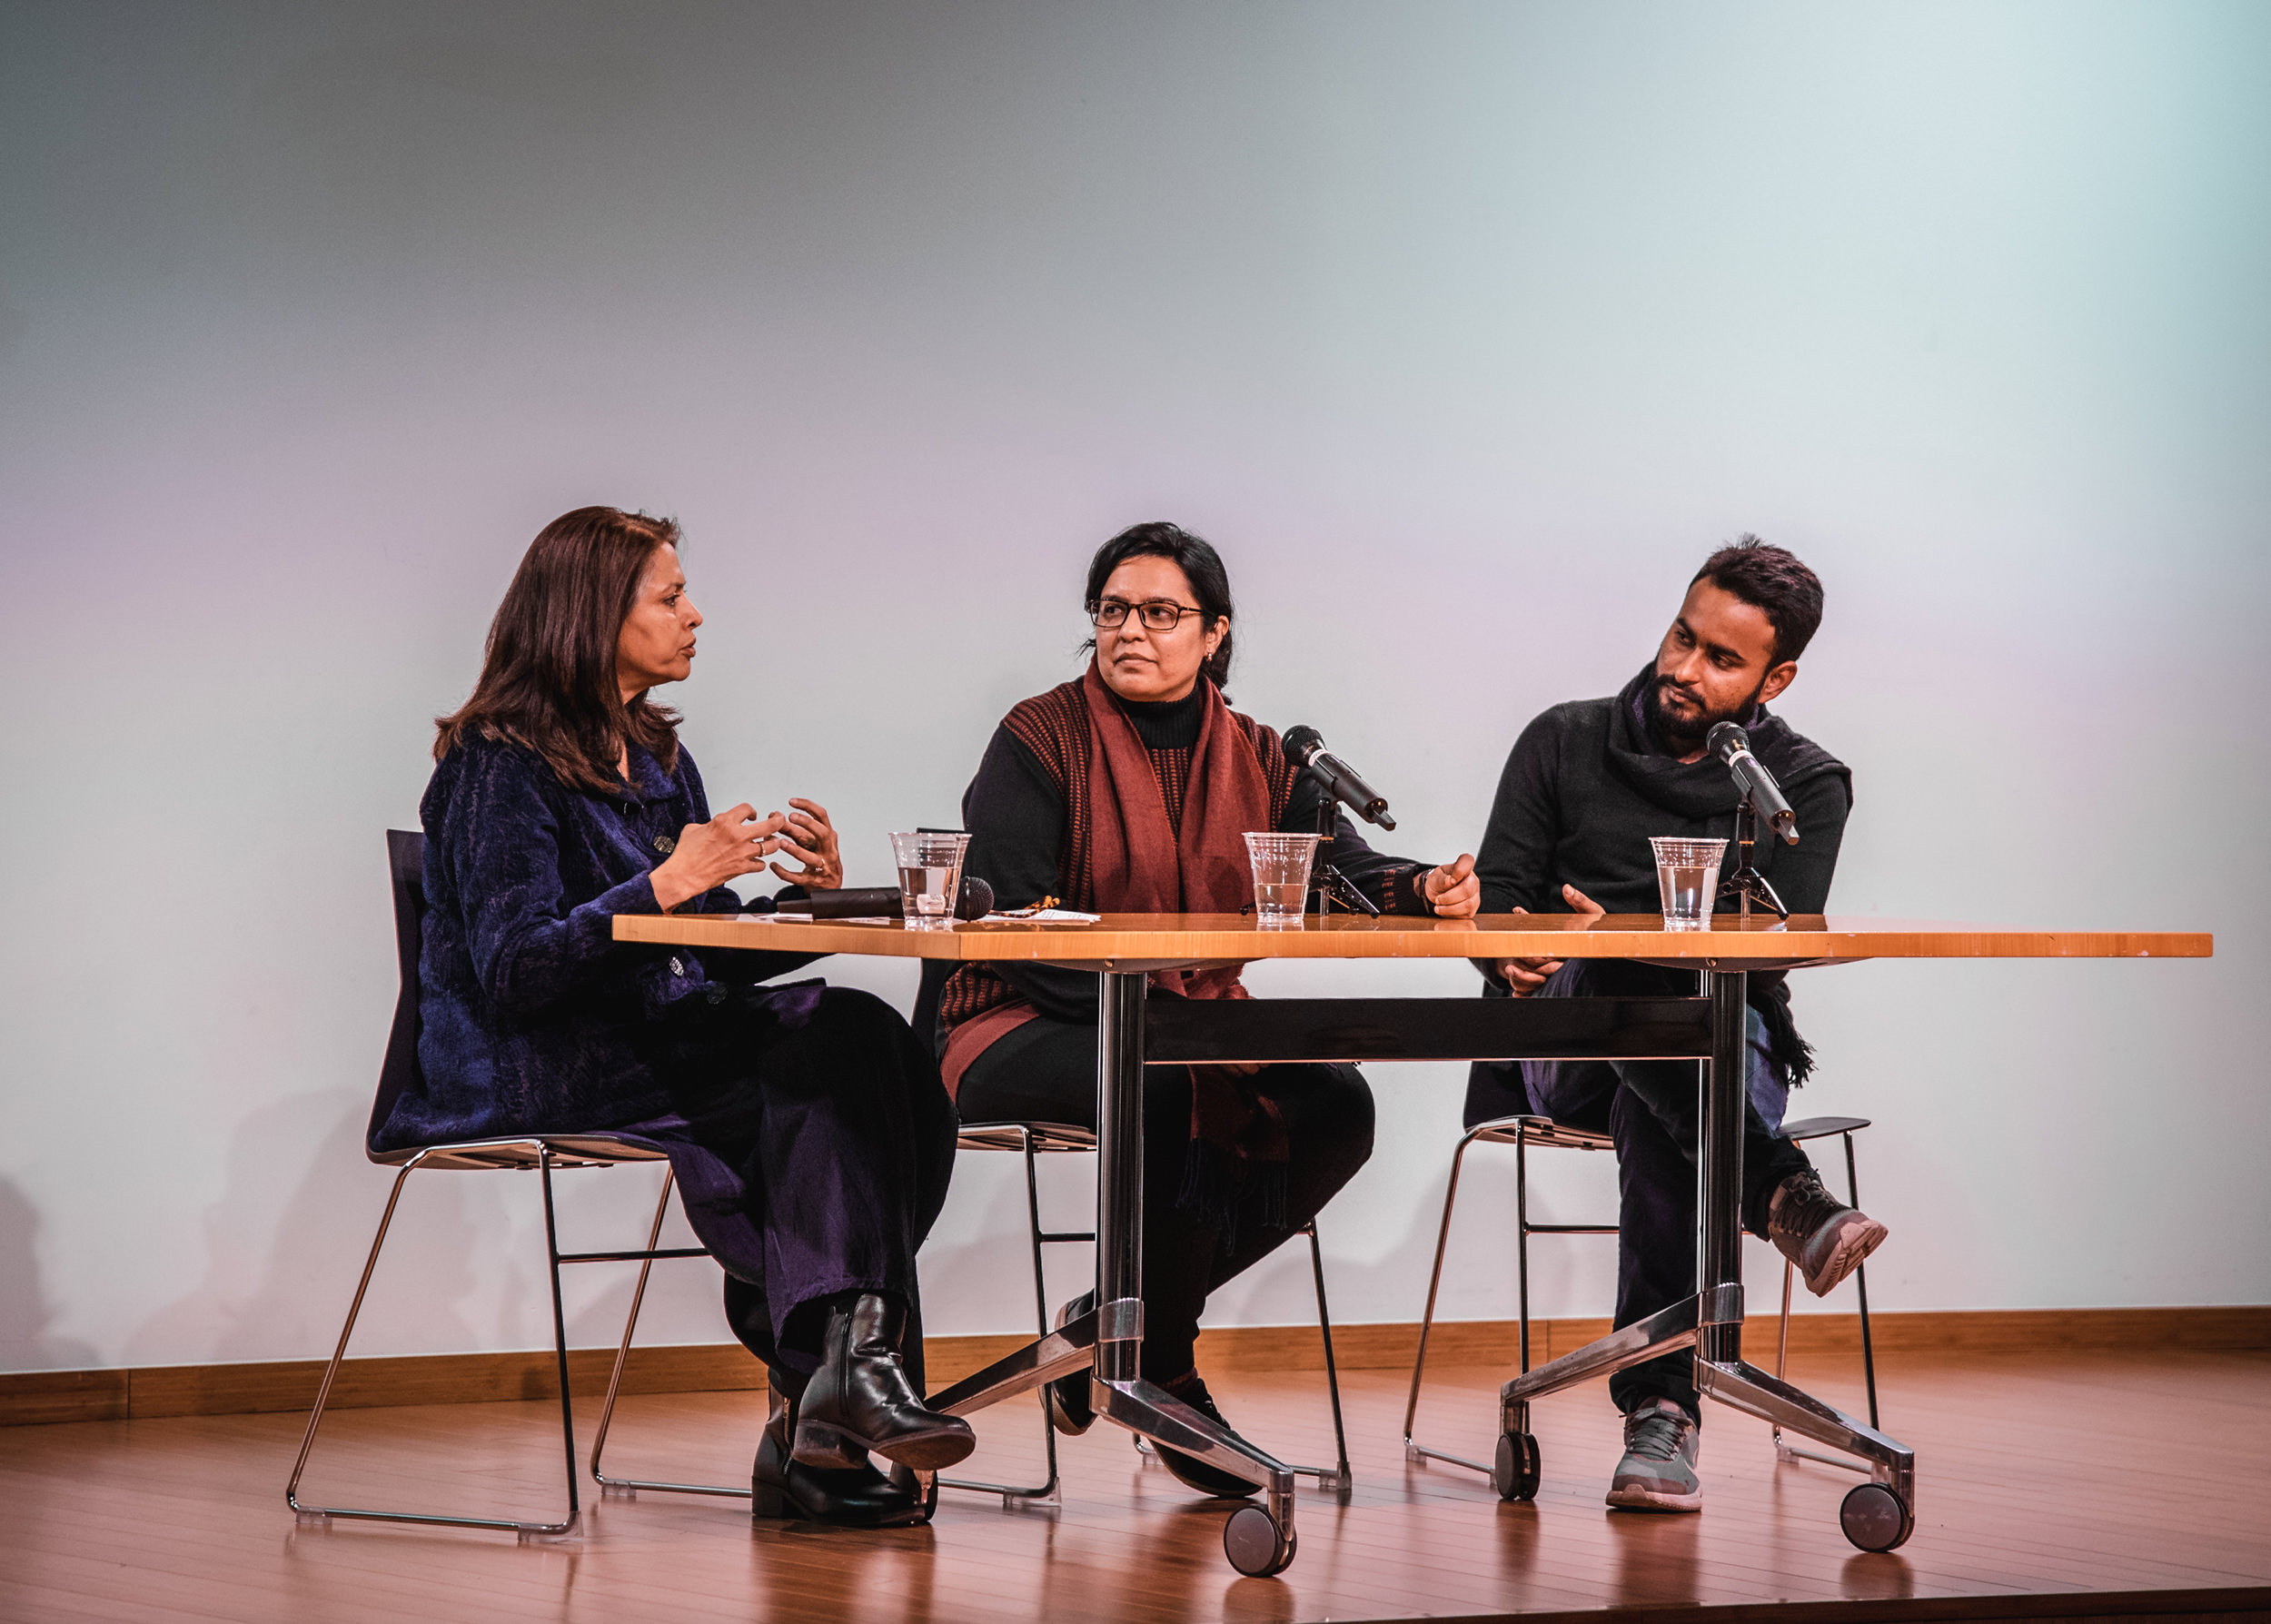 From left to right: Meena Sonea Hewett discusses the work of Krupa Makhija and Mahbub Jokhio on stage.